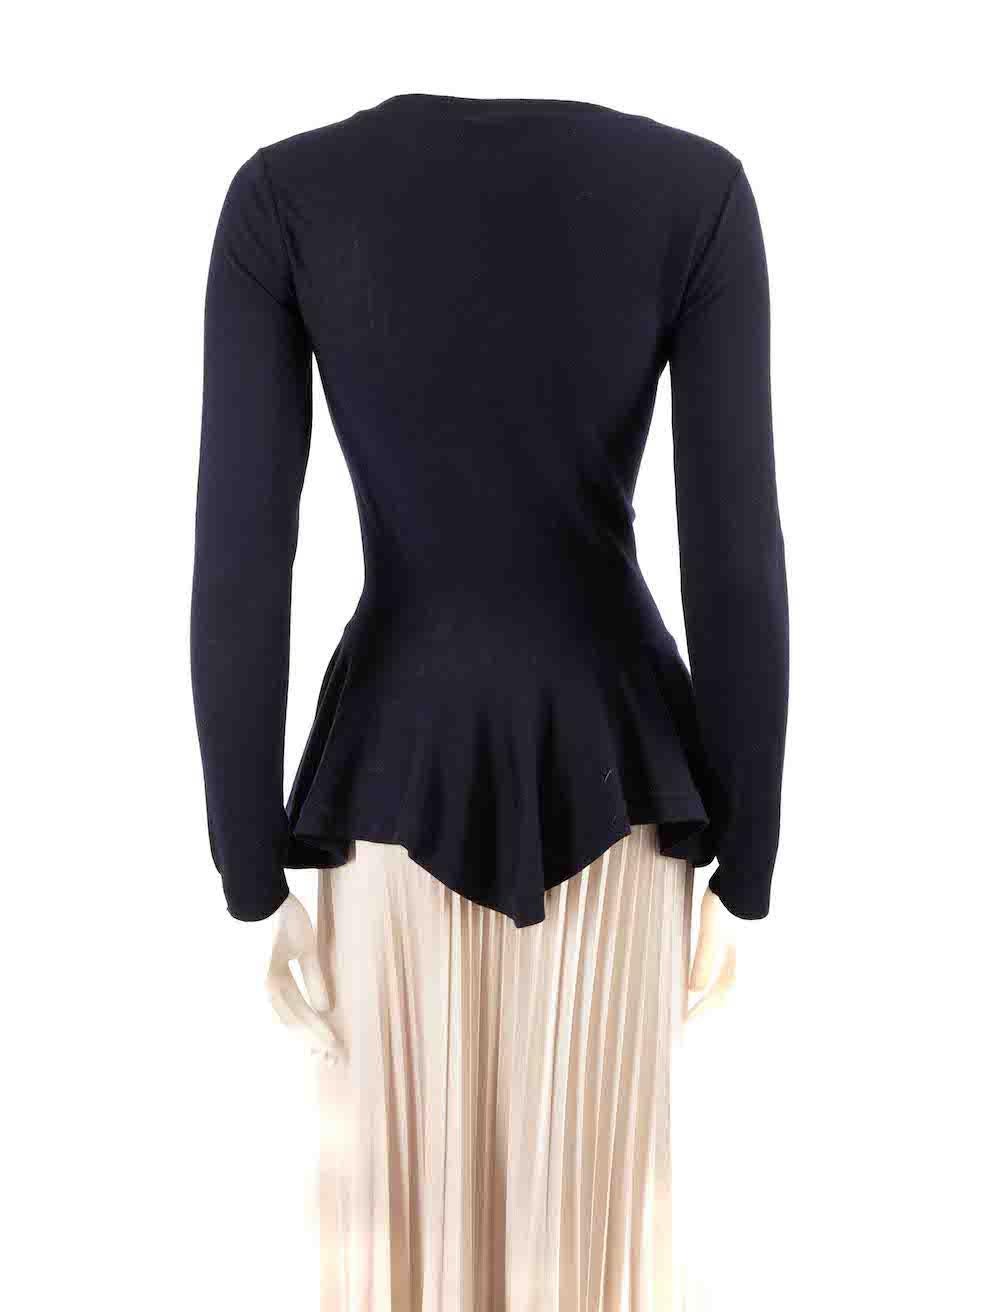 Alexander McQueen Navy Wool Peplum Ruffled Top Size S In Good Condition For Sale In London, GB